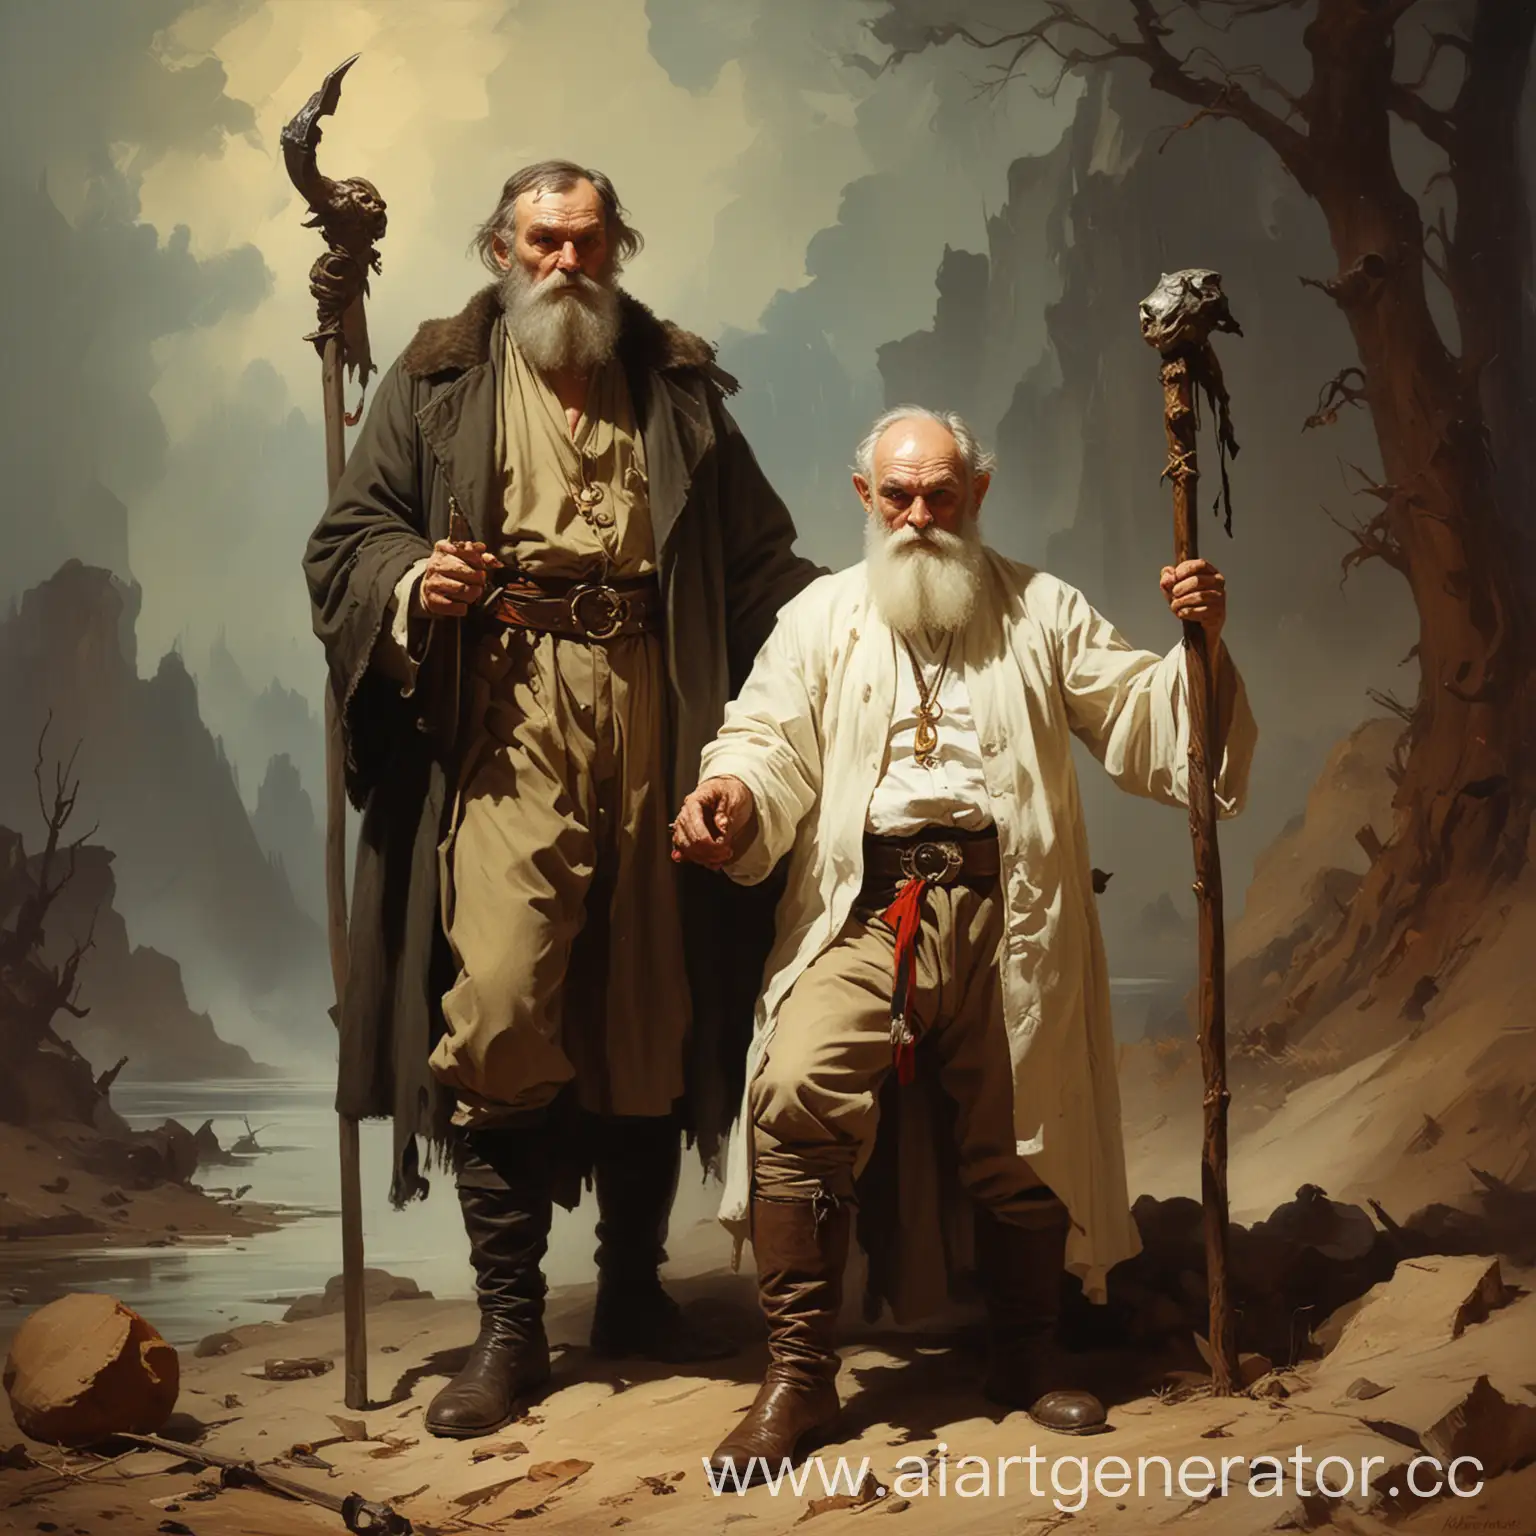 Lev-Nikolaevich-Tolstoy-Holding-a-Staff-in-Epic-Fantasy-Style-Artwork